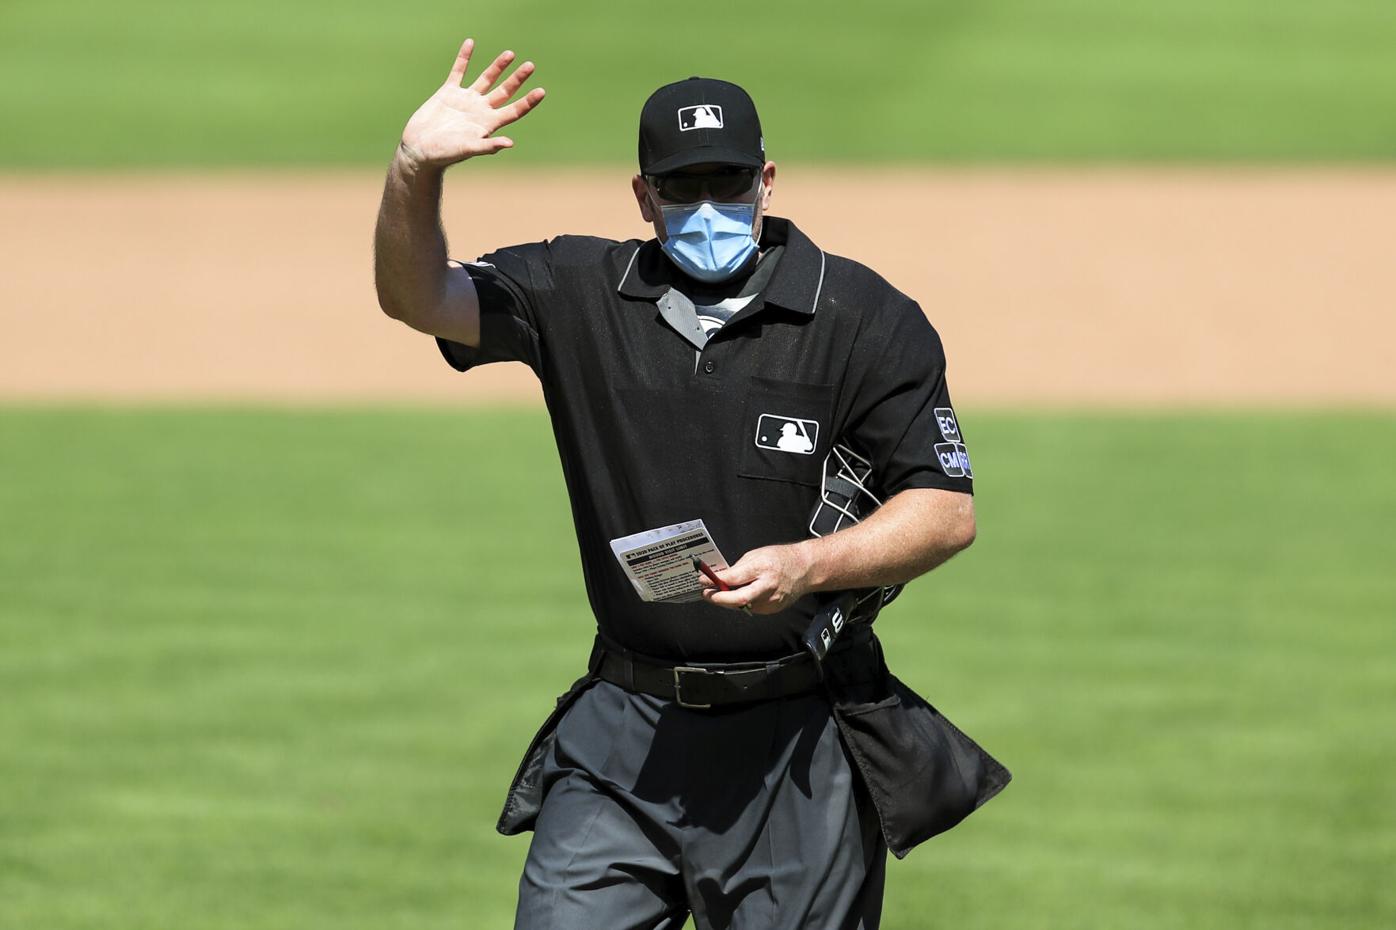 Checking up on Berkshire County's MLB umpire Chris Conroy, Local Sports